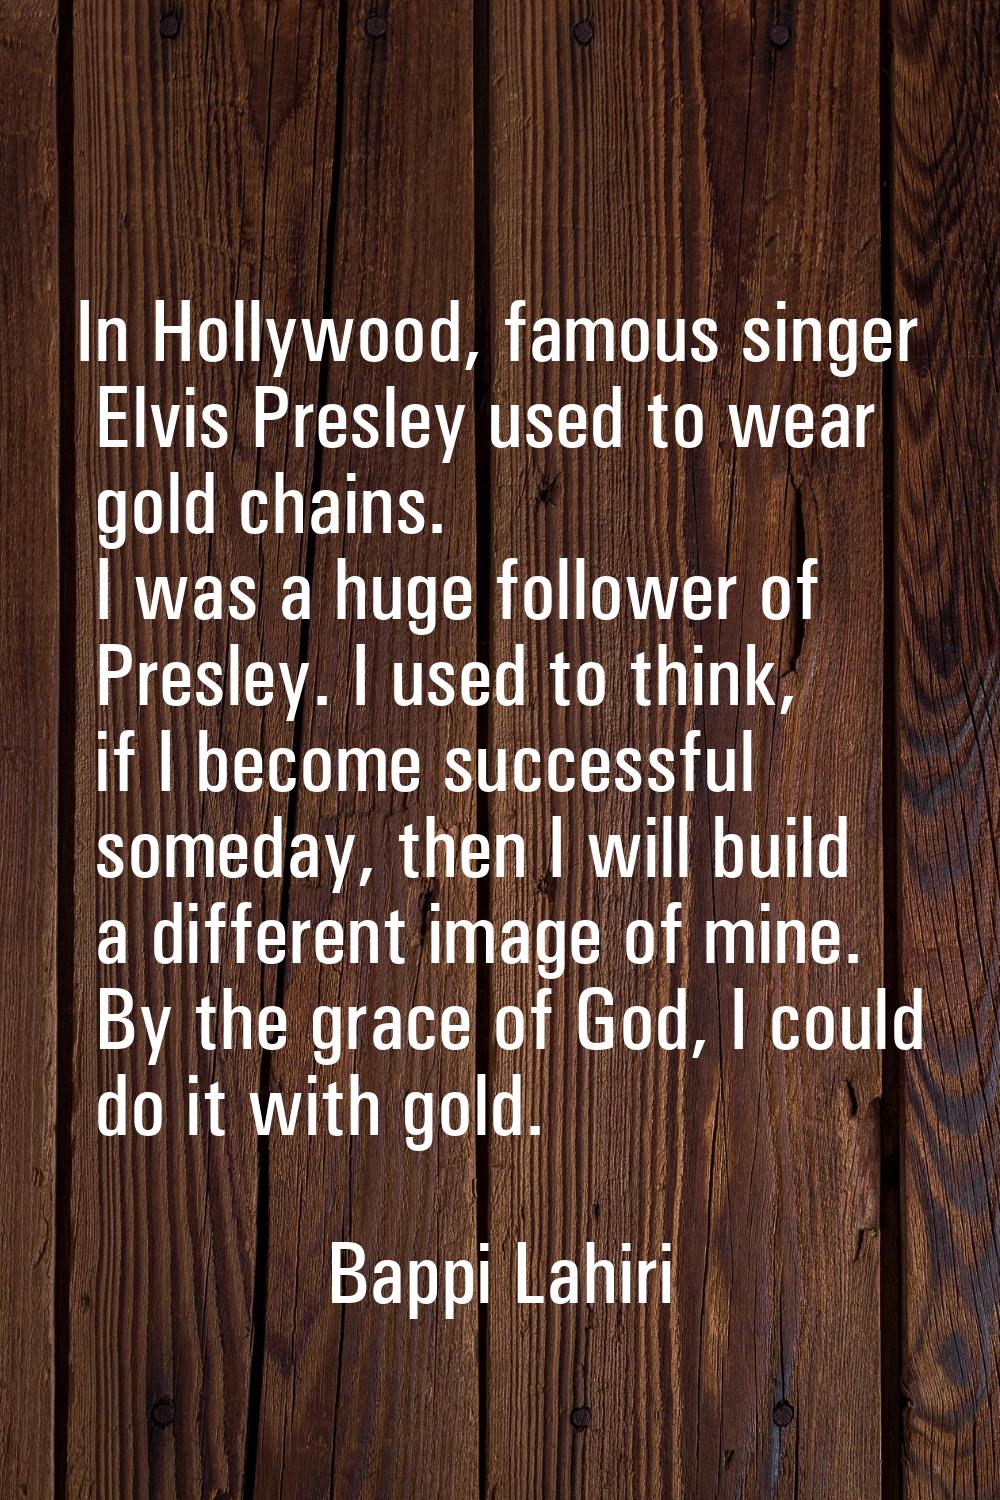 In Hollywood, famous singer Elvis Presley used to wear gold chains. I was a huge follower of Presle